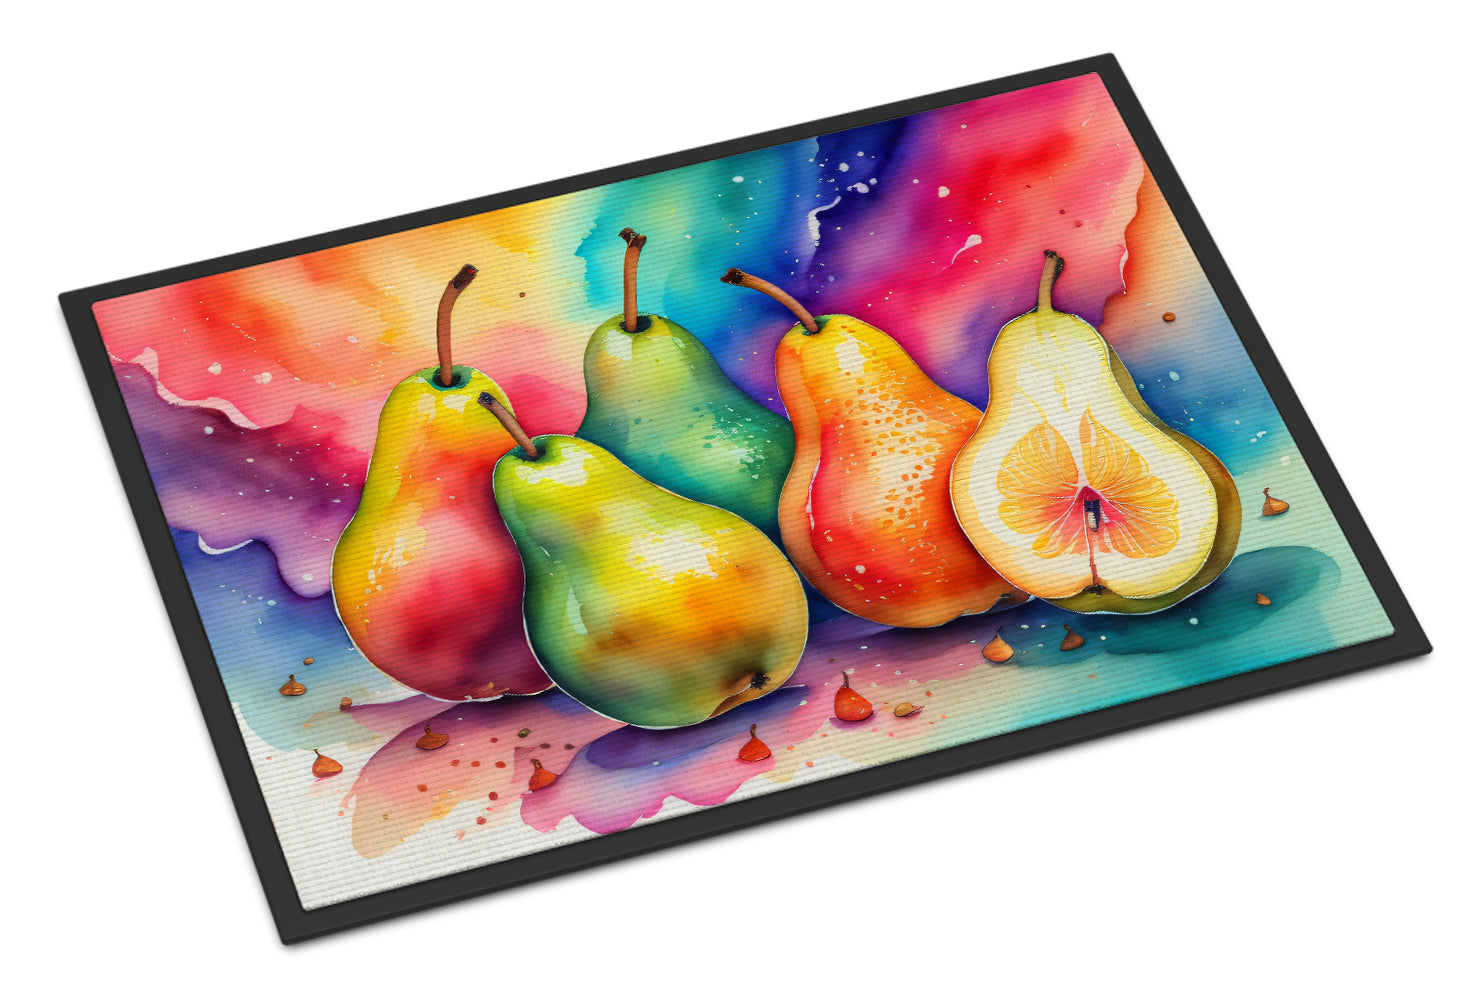 Buy this Colorful Pears Doormat 18x27